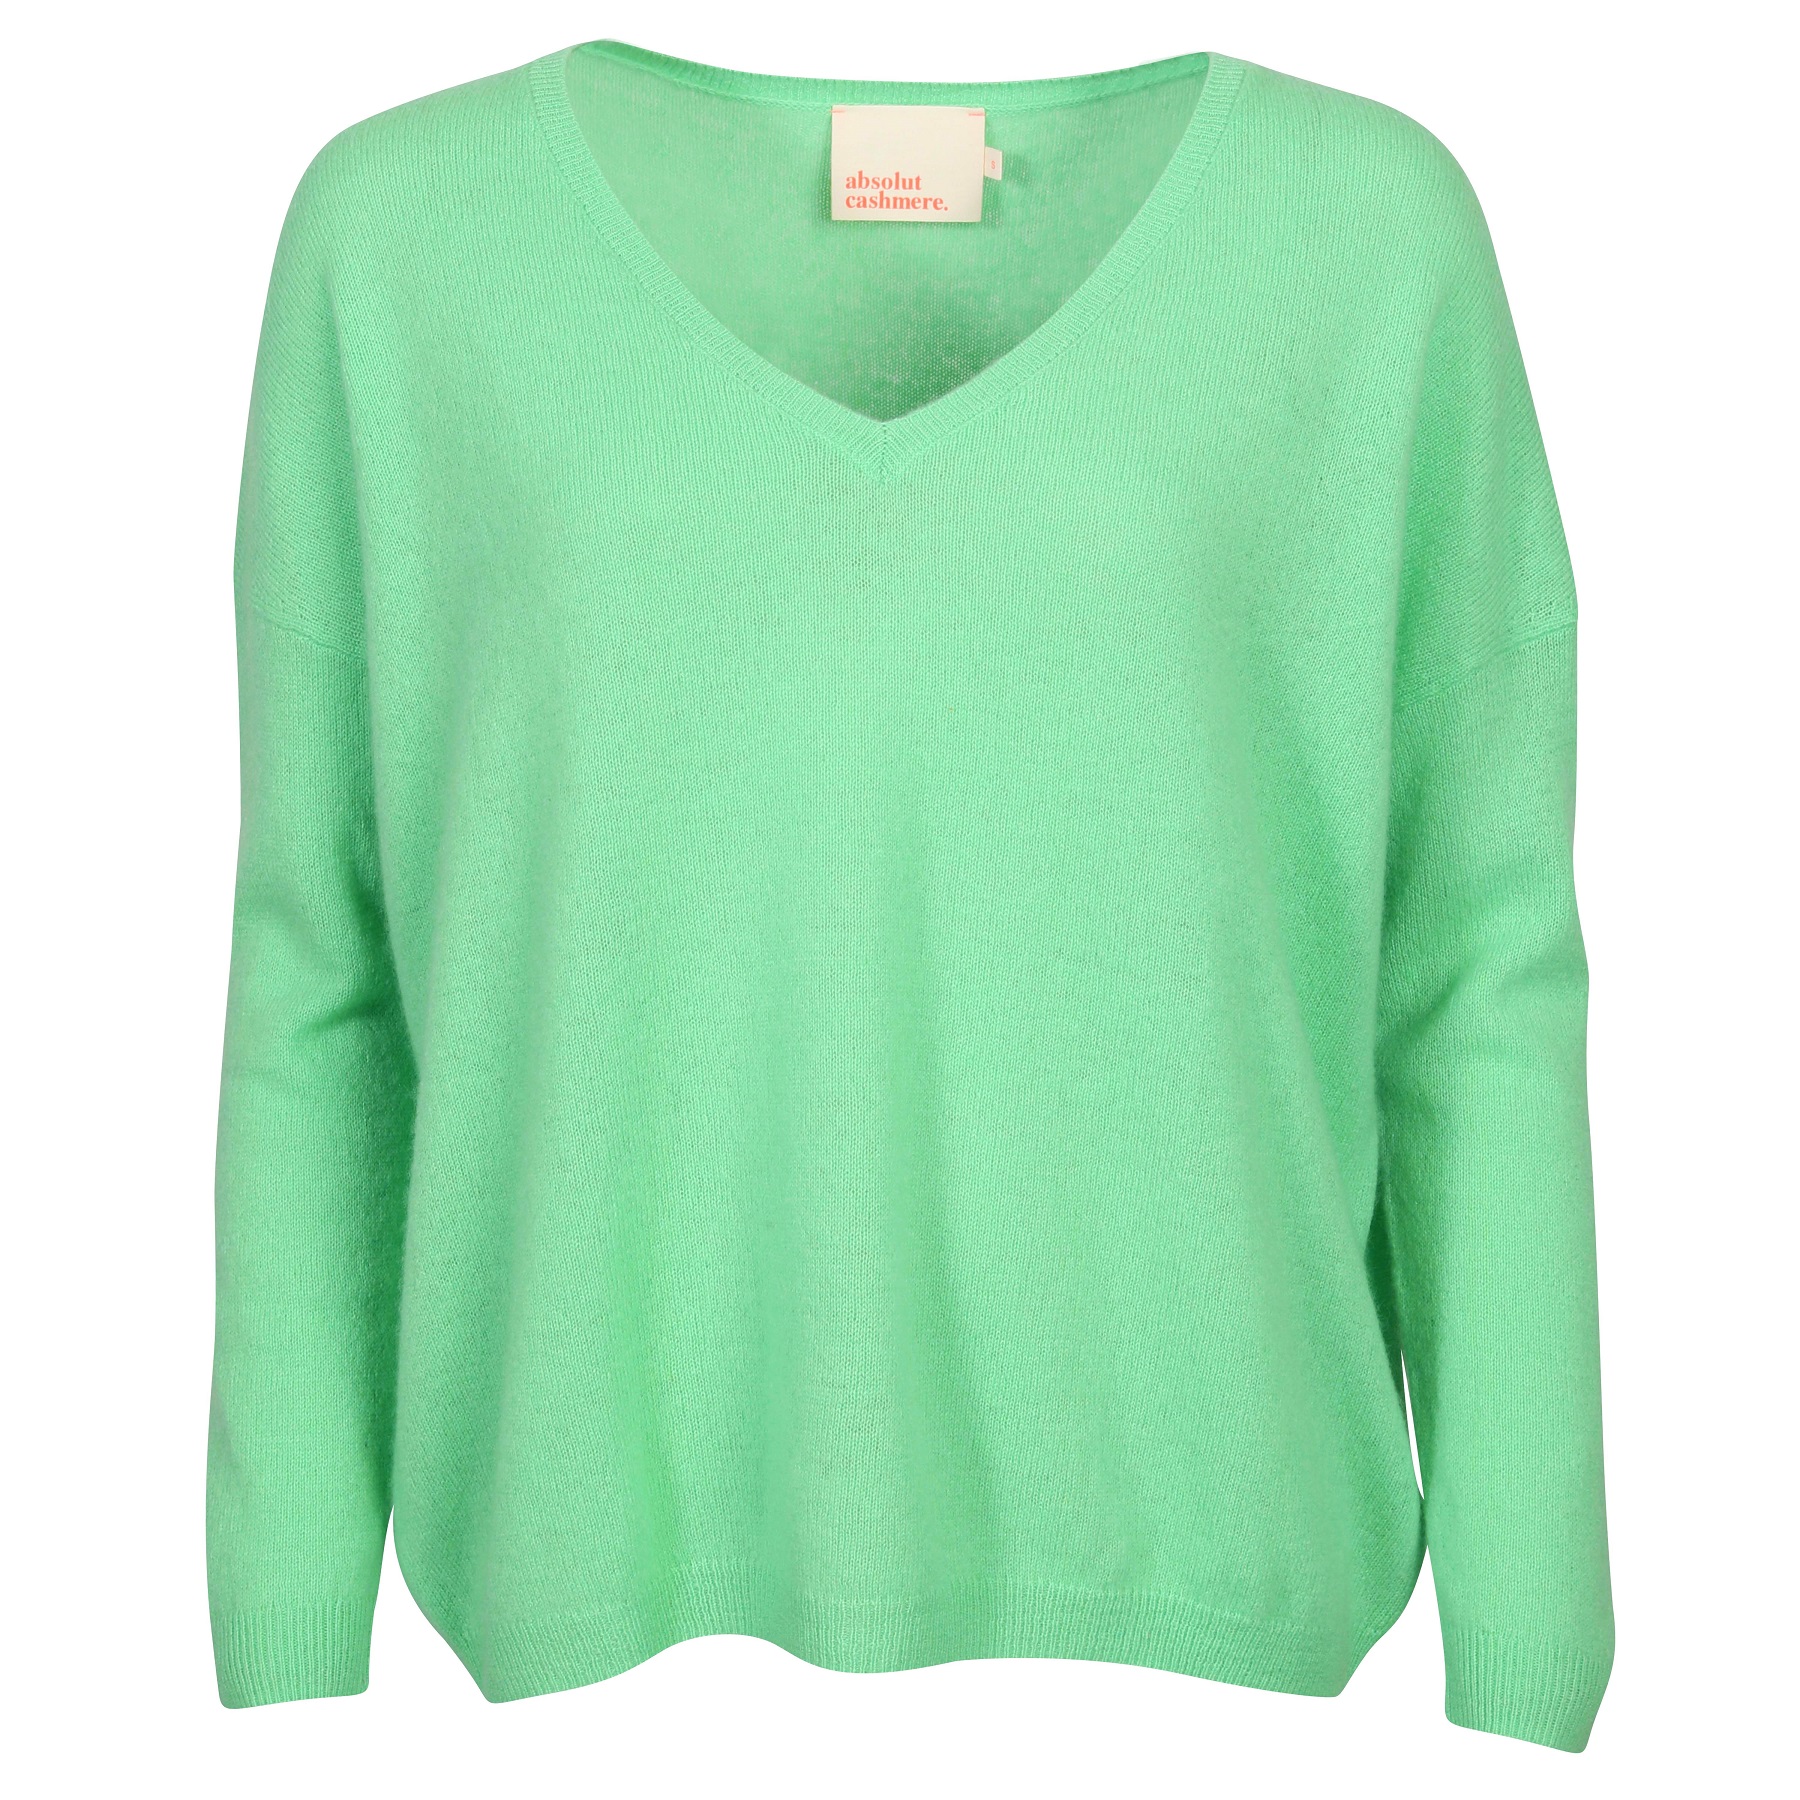 Absolut Cashmere Pullover Angele in Light Green L